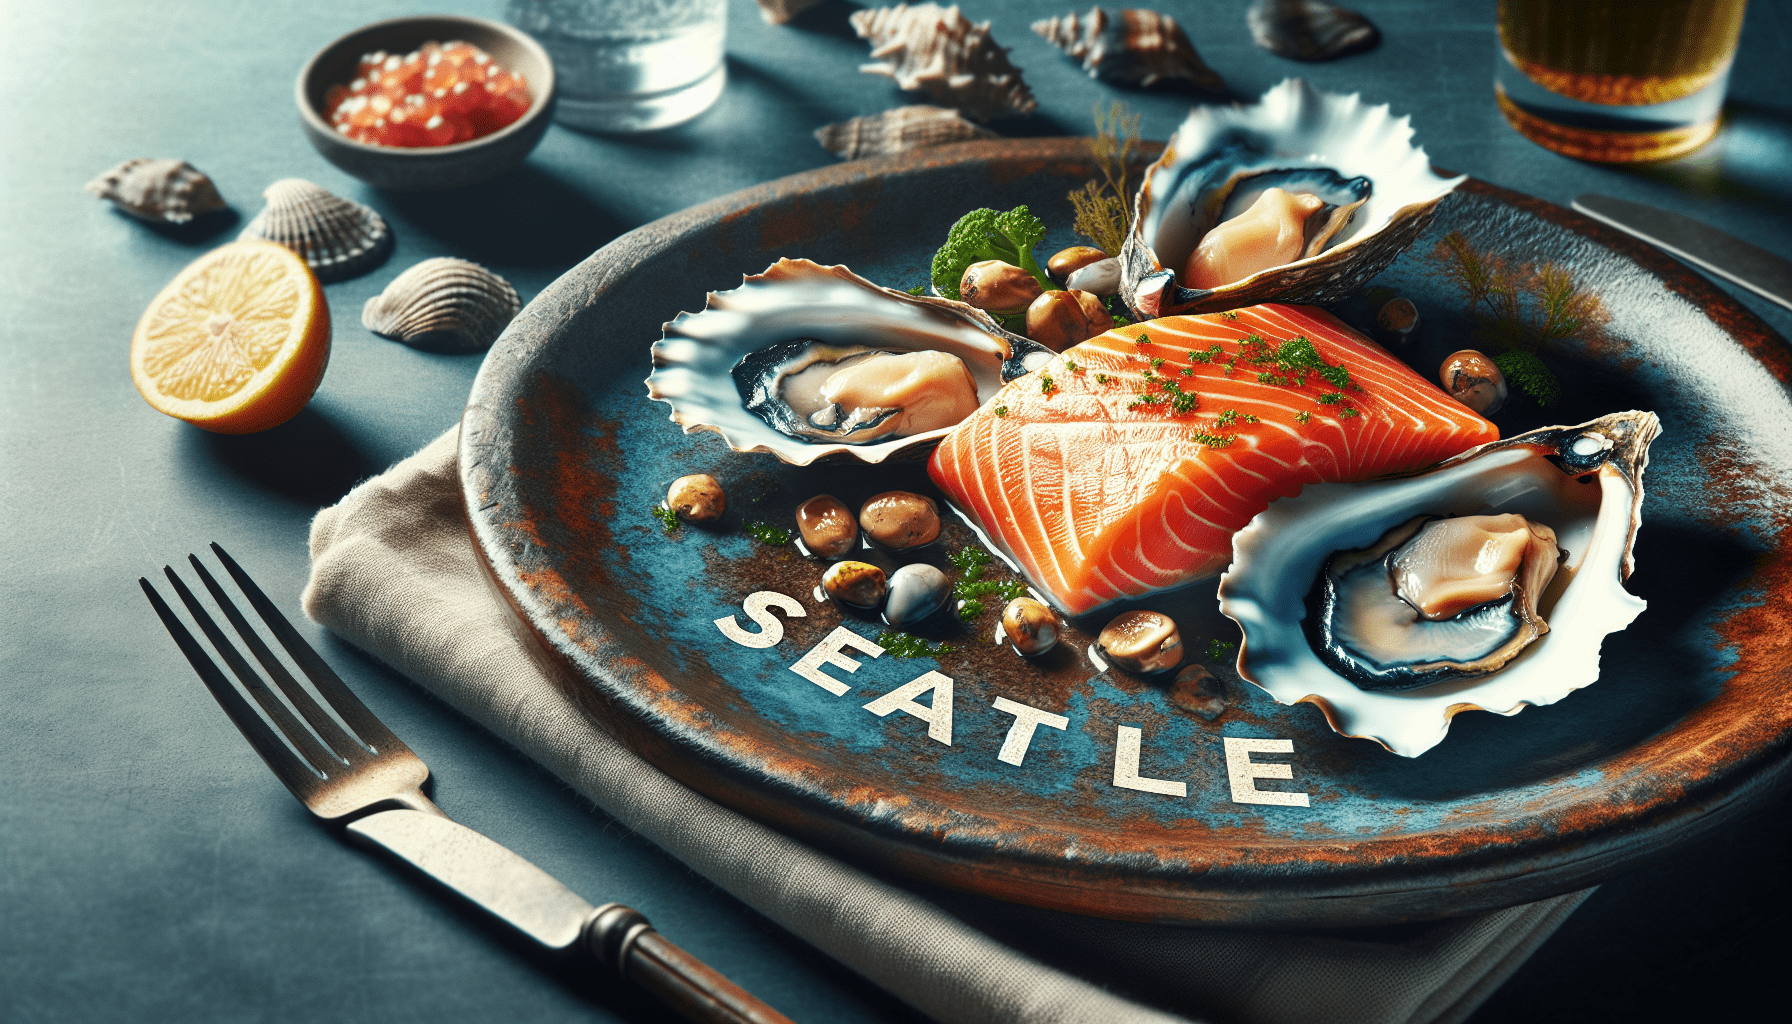 How Much Does A Meal Cost In Seattle?